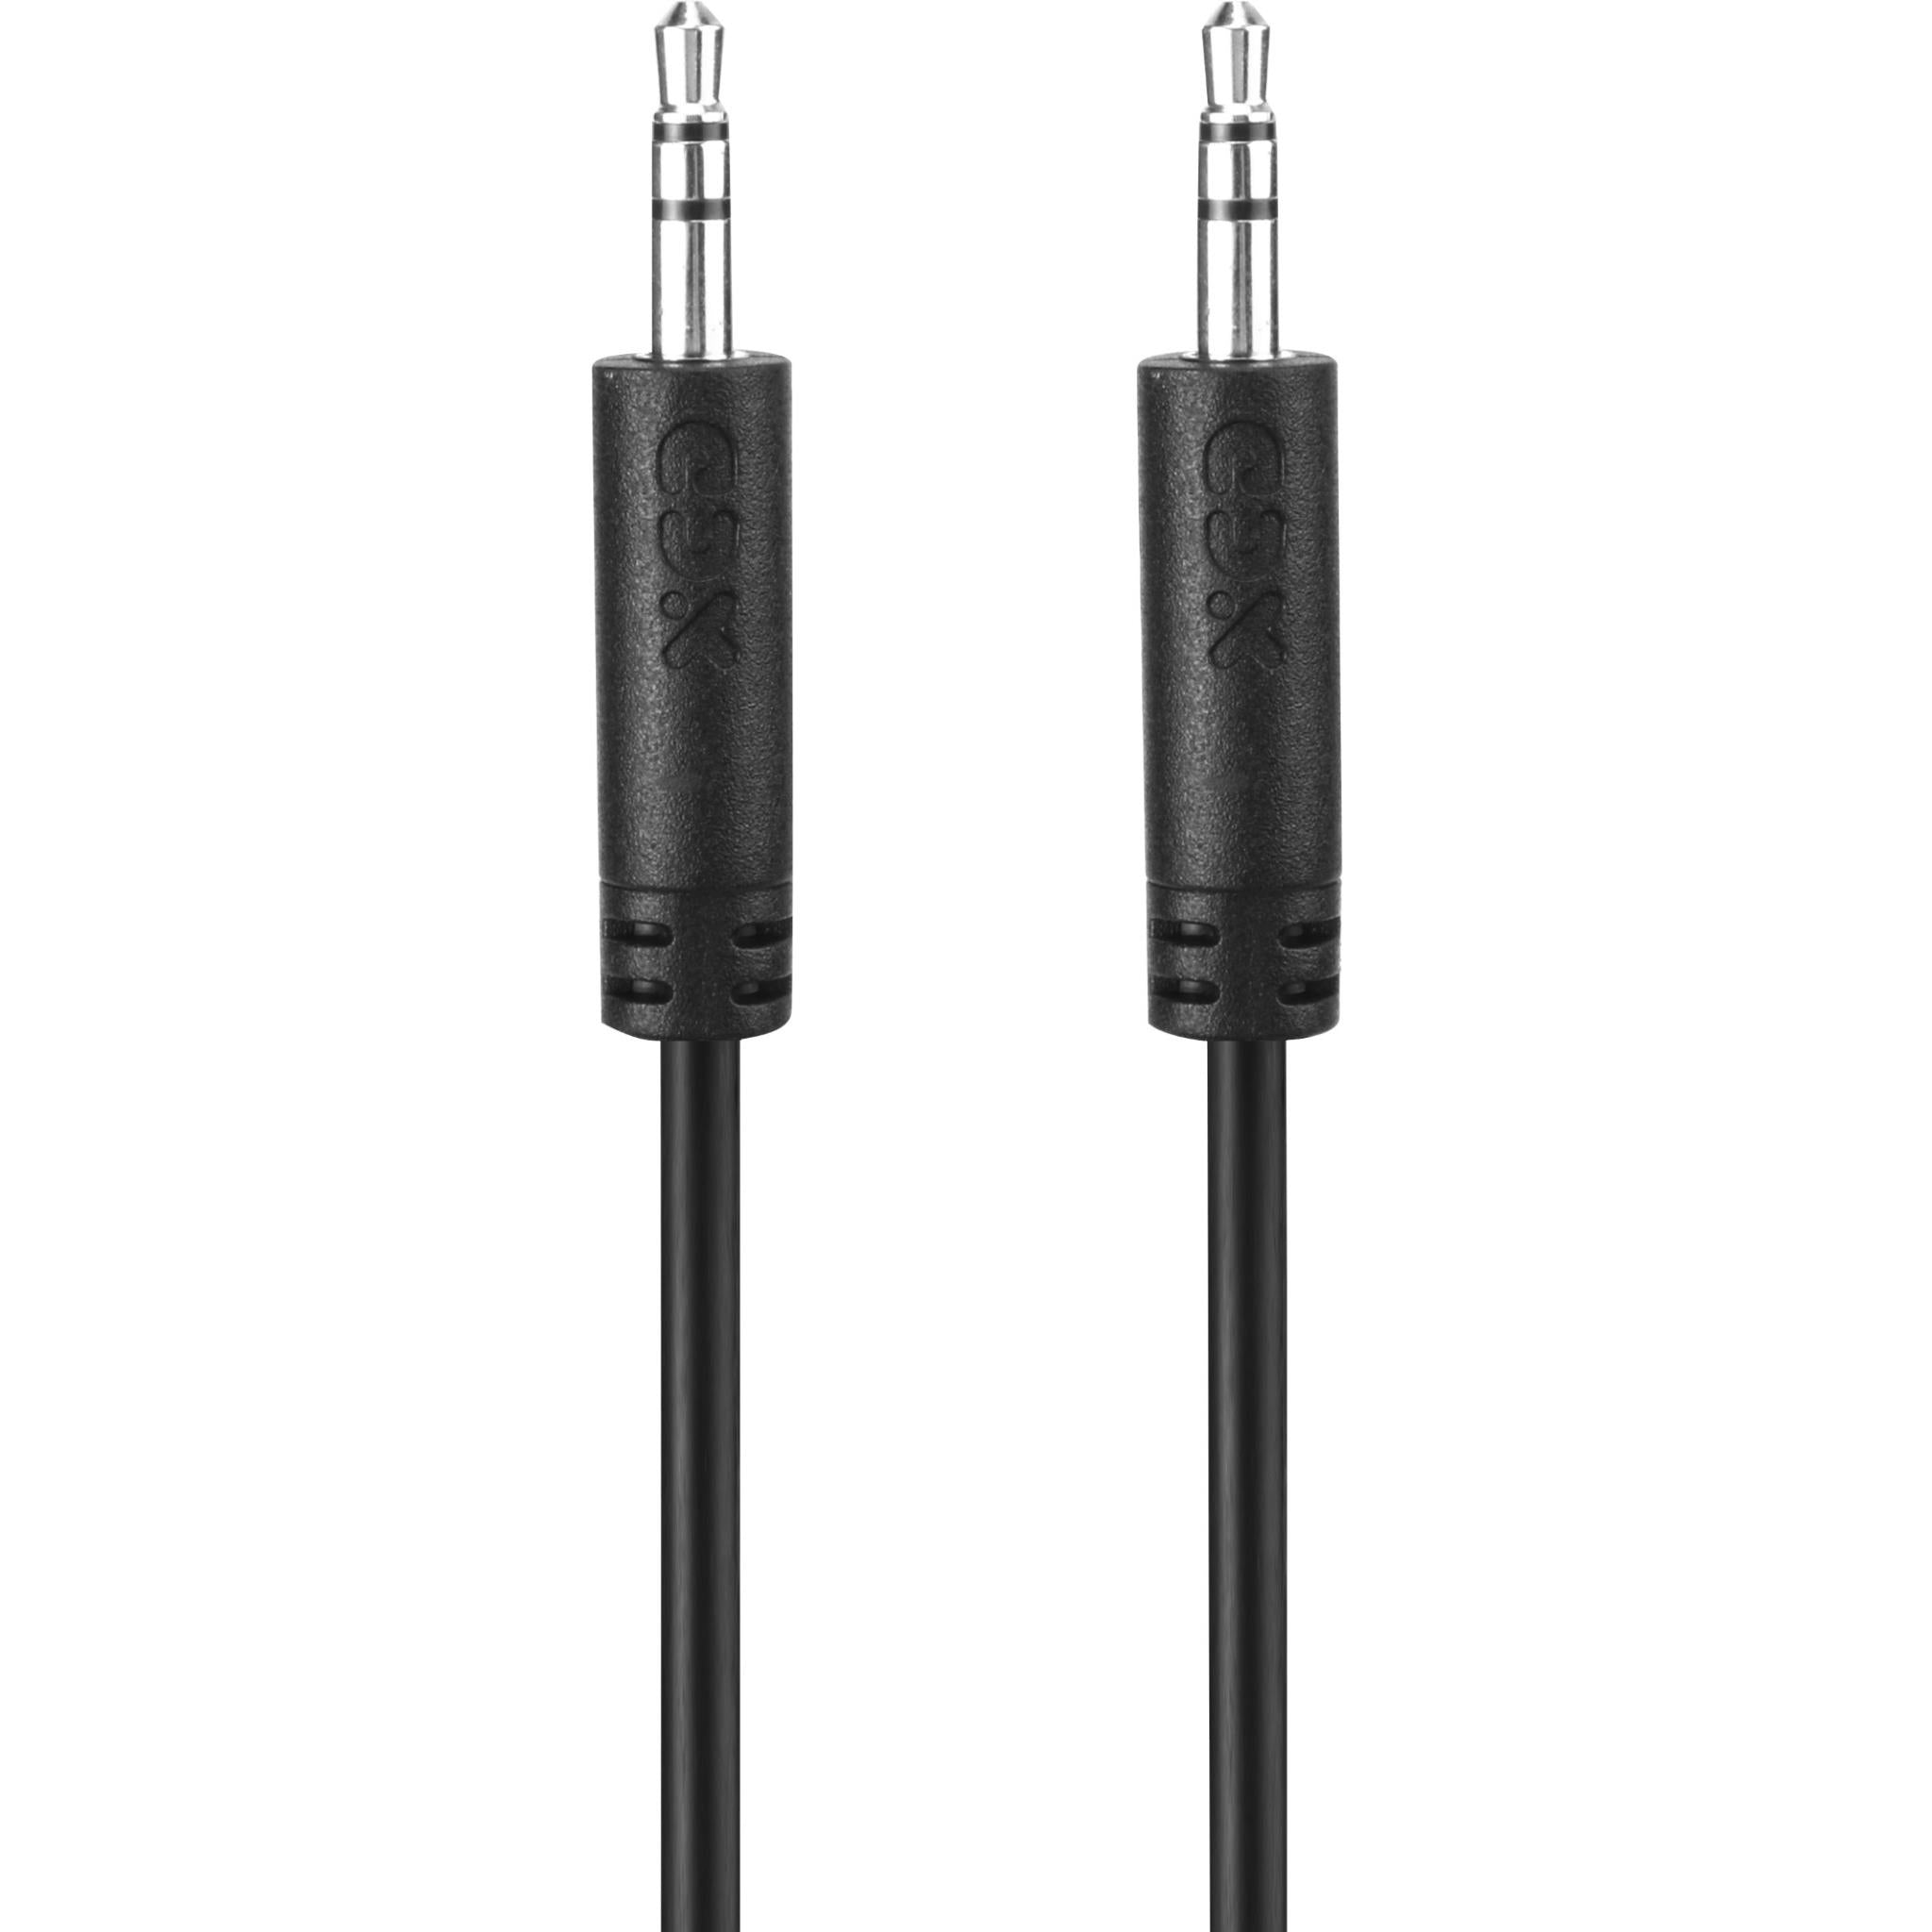 xcd essentials 3.5mm male to male cable 2m